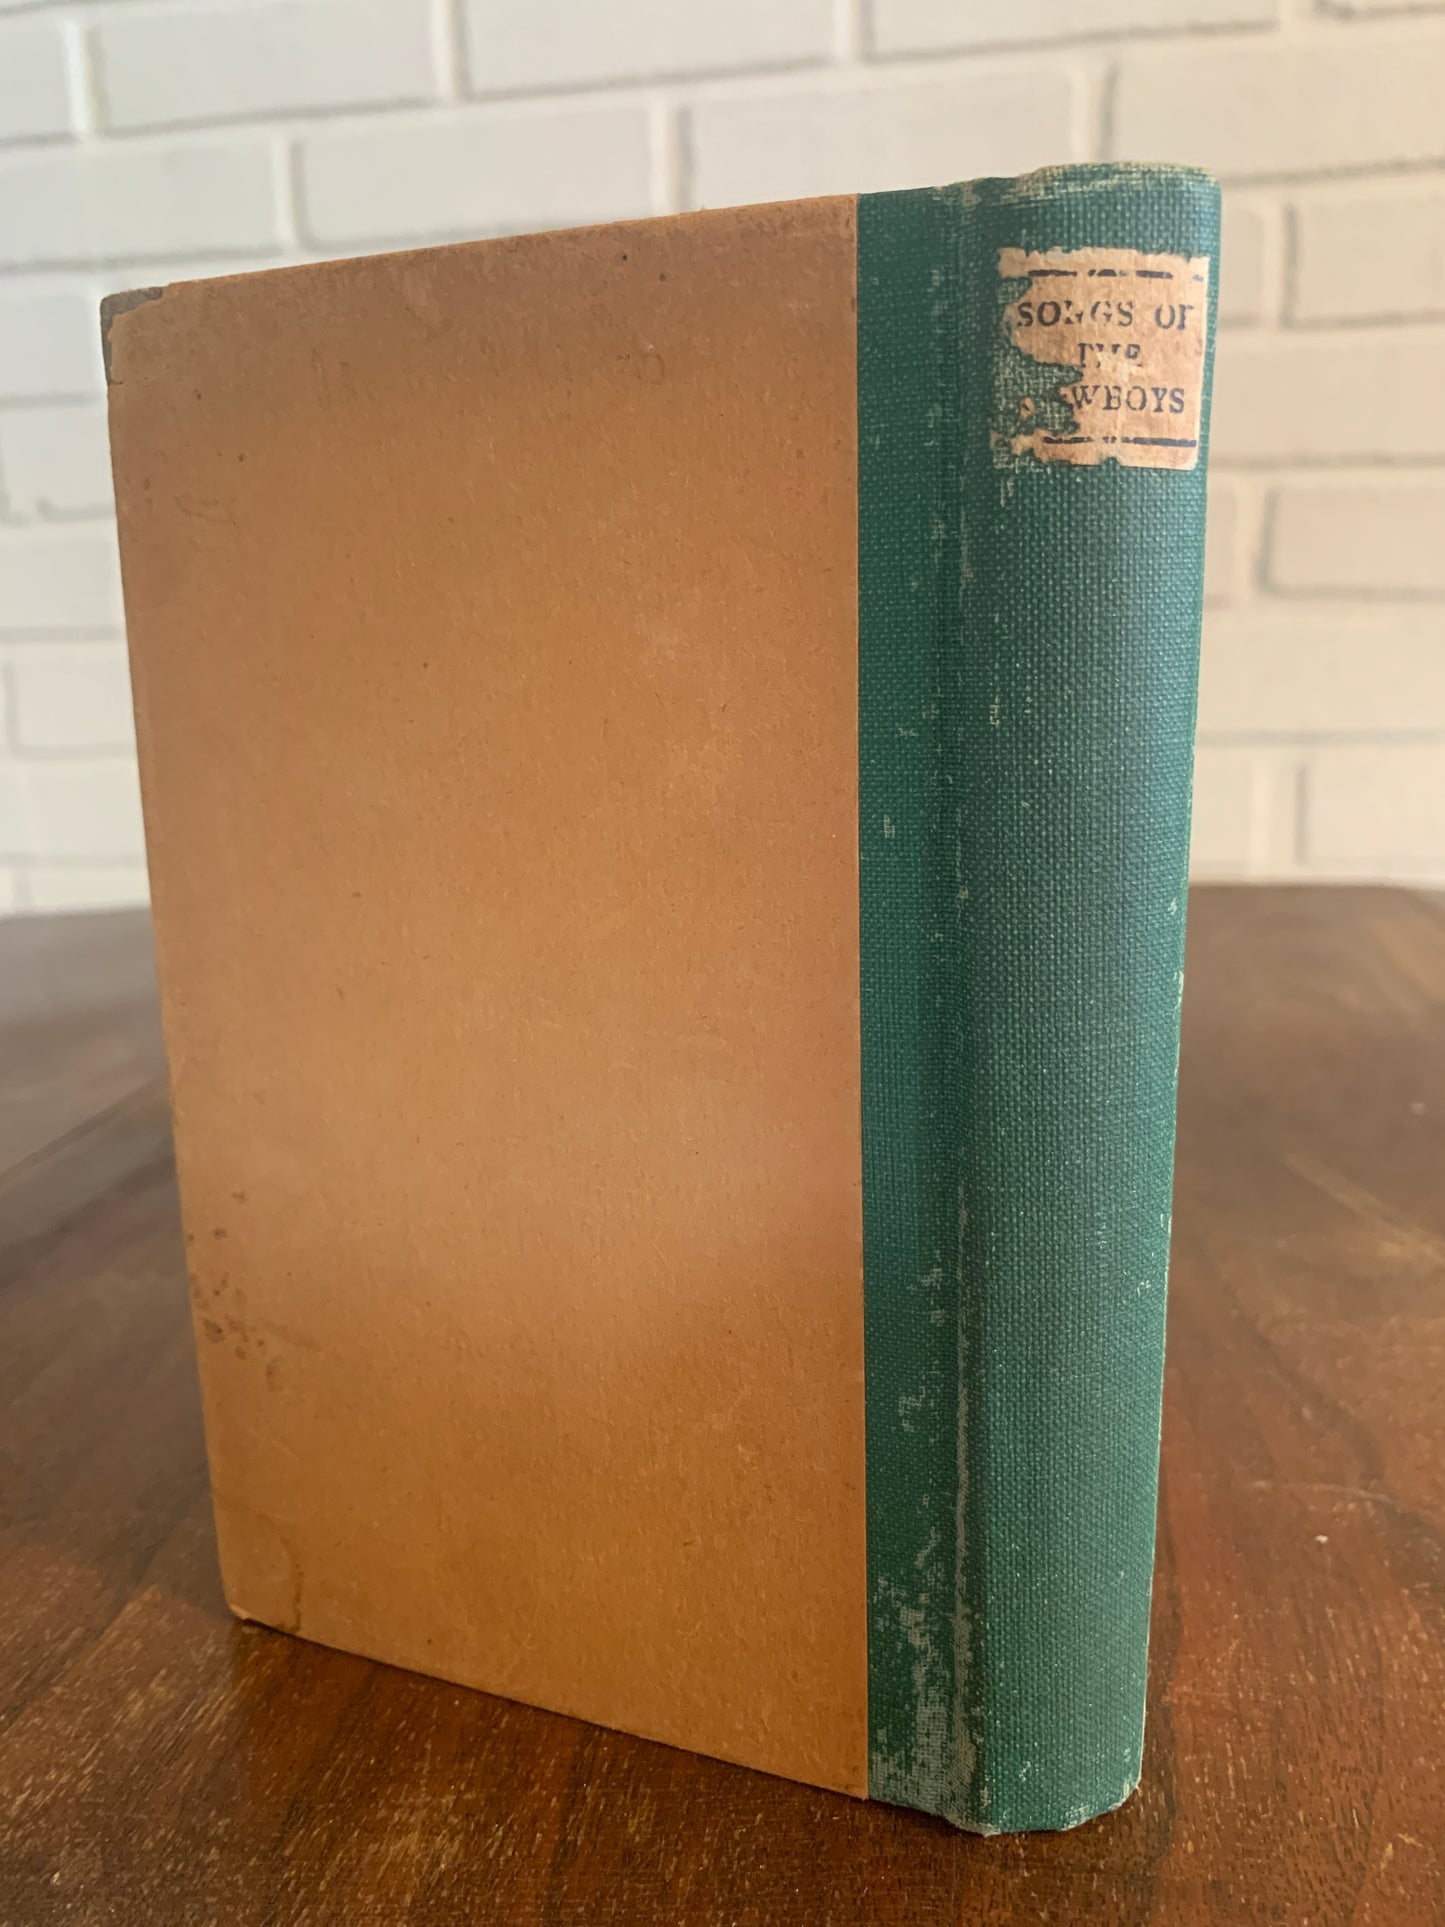 Songs of the Cowboys compiled by N. Howard Thorp 1921